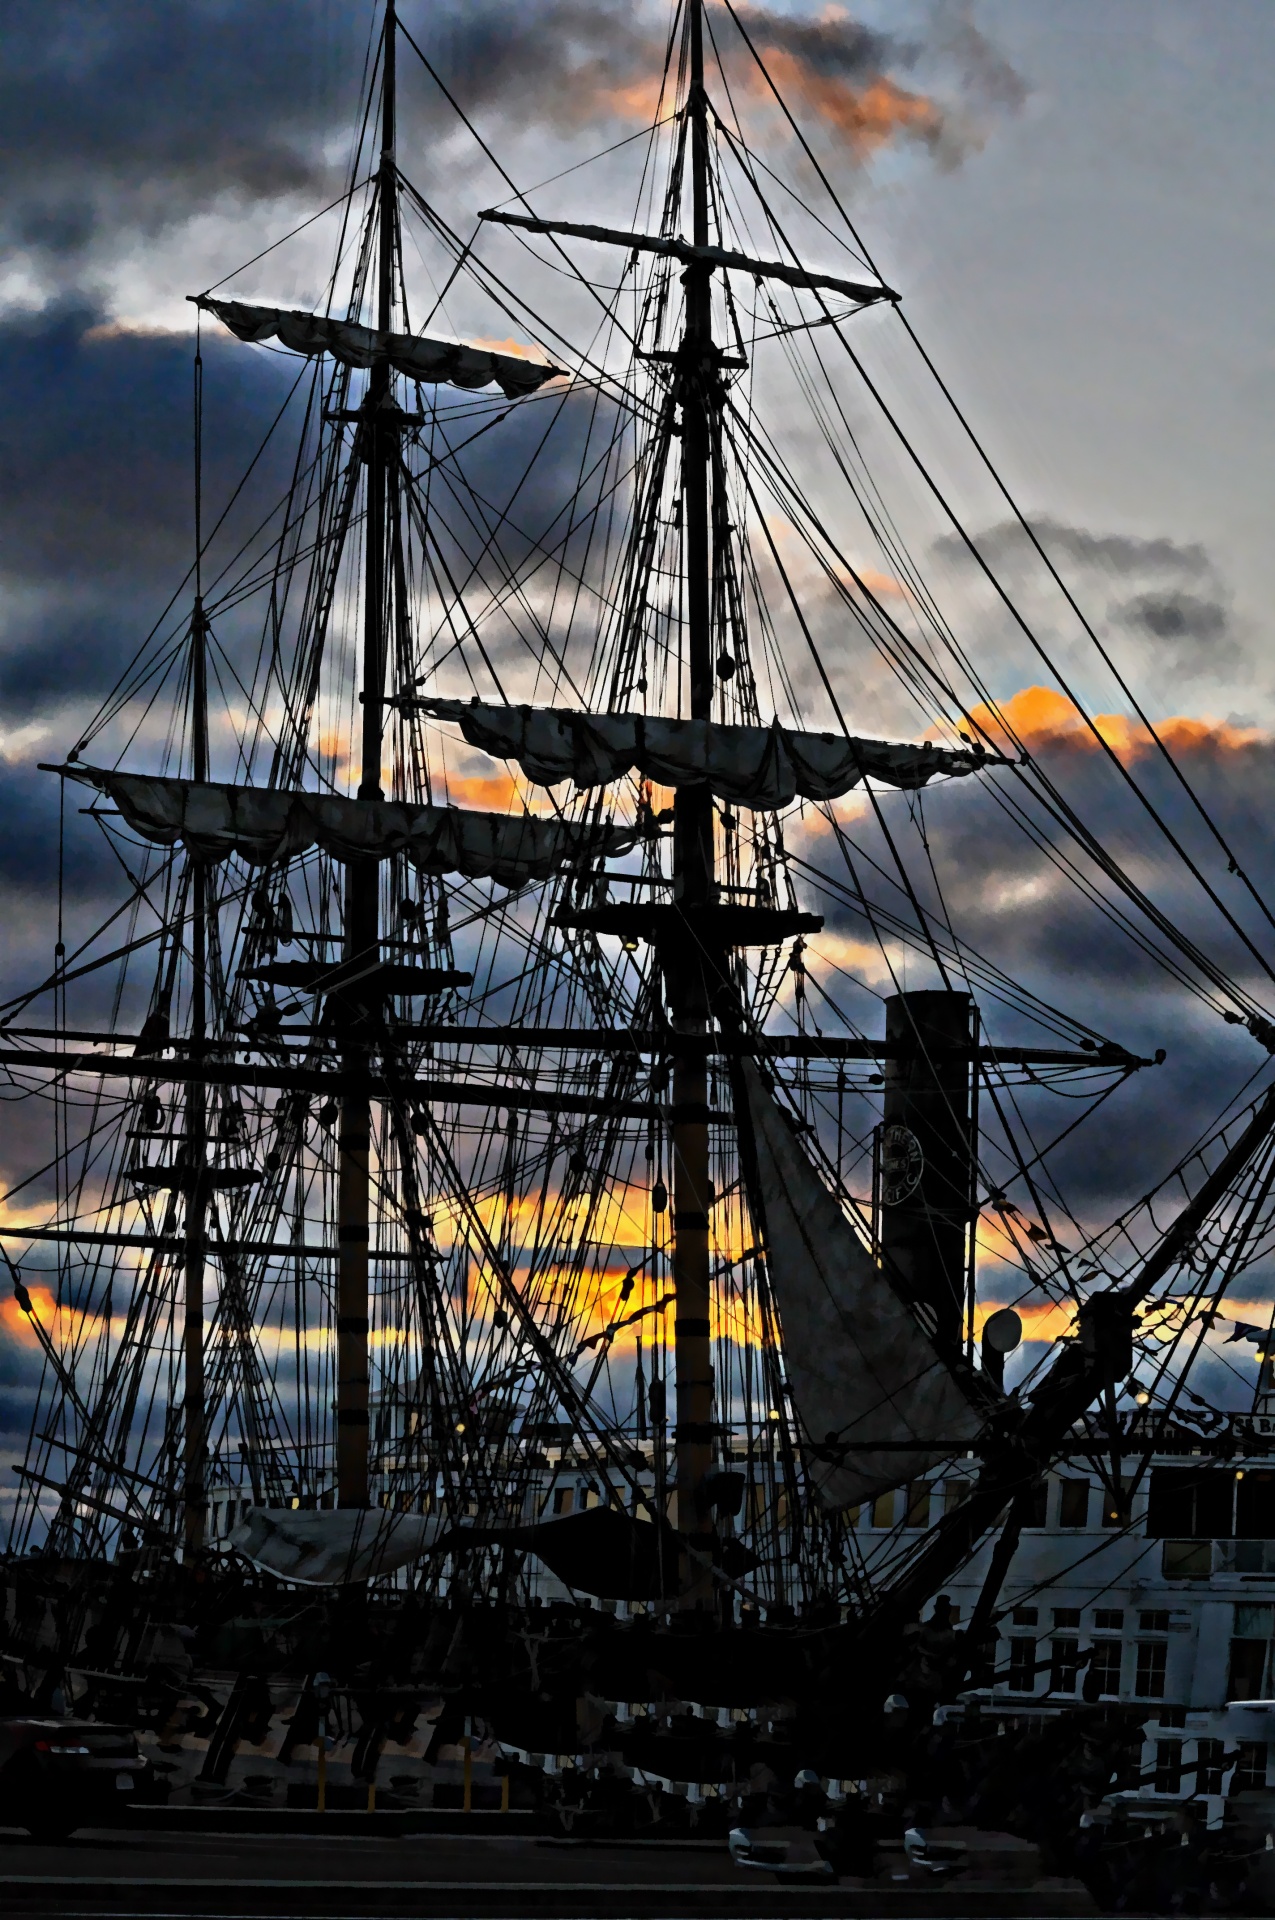 old sailing vessel docked in setting sun